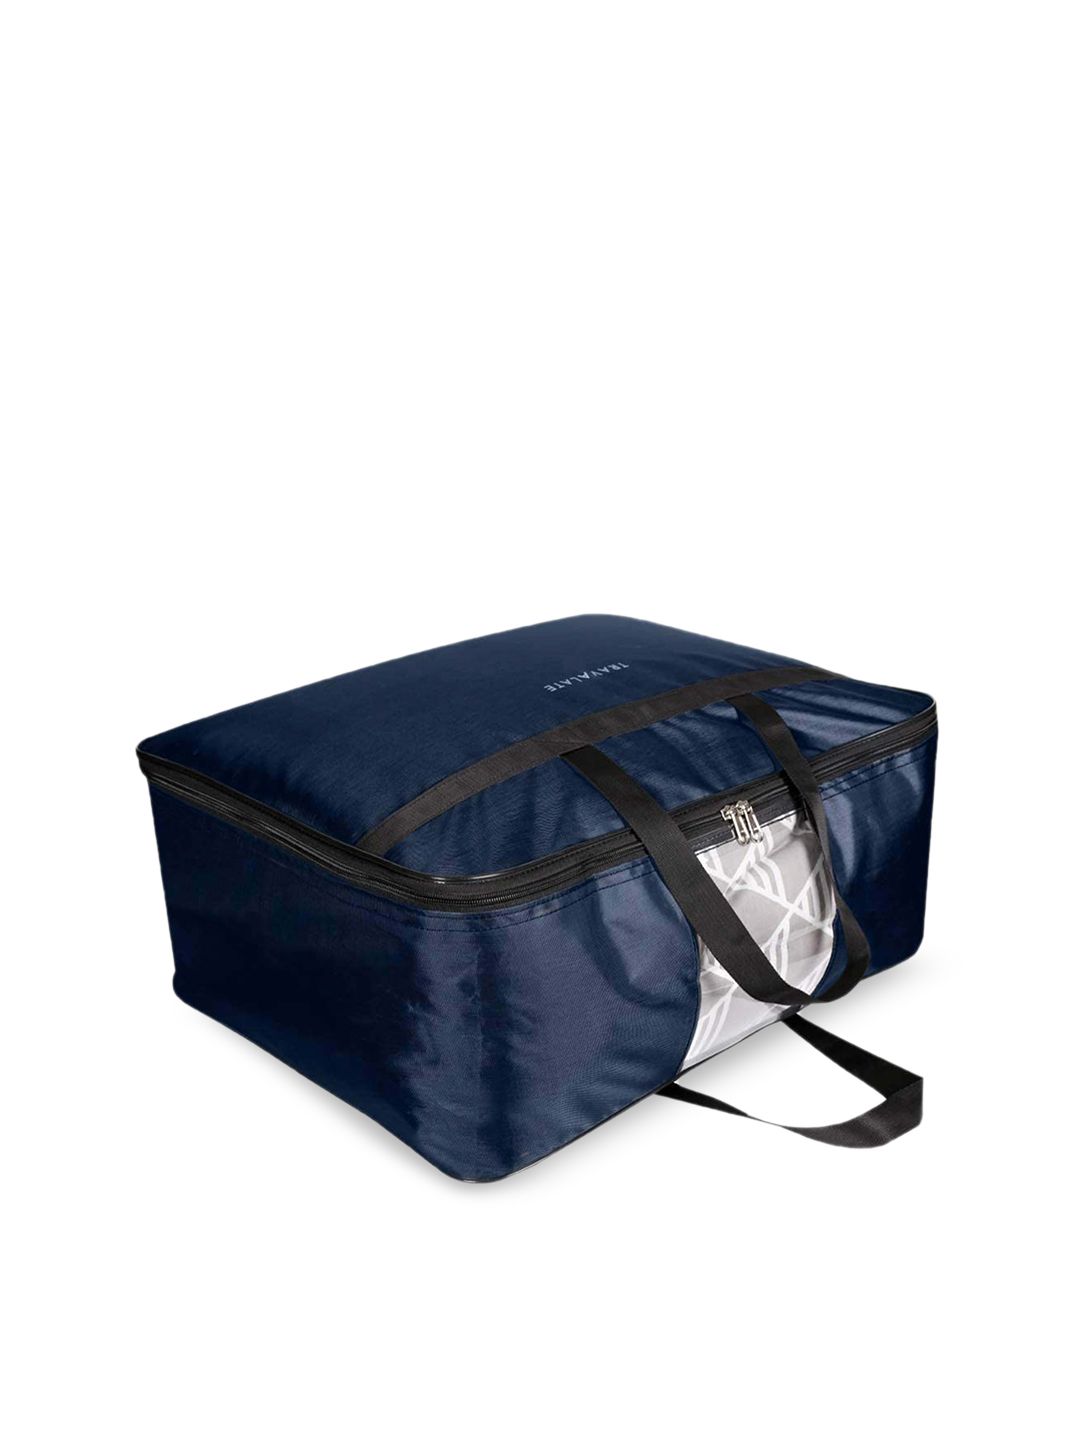 TRAVALATE Navy Blue Solid Storage Bag Price in India